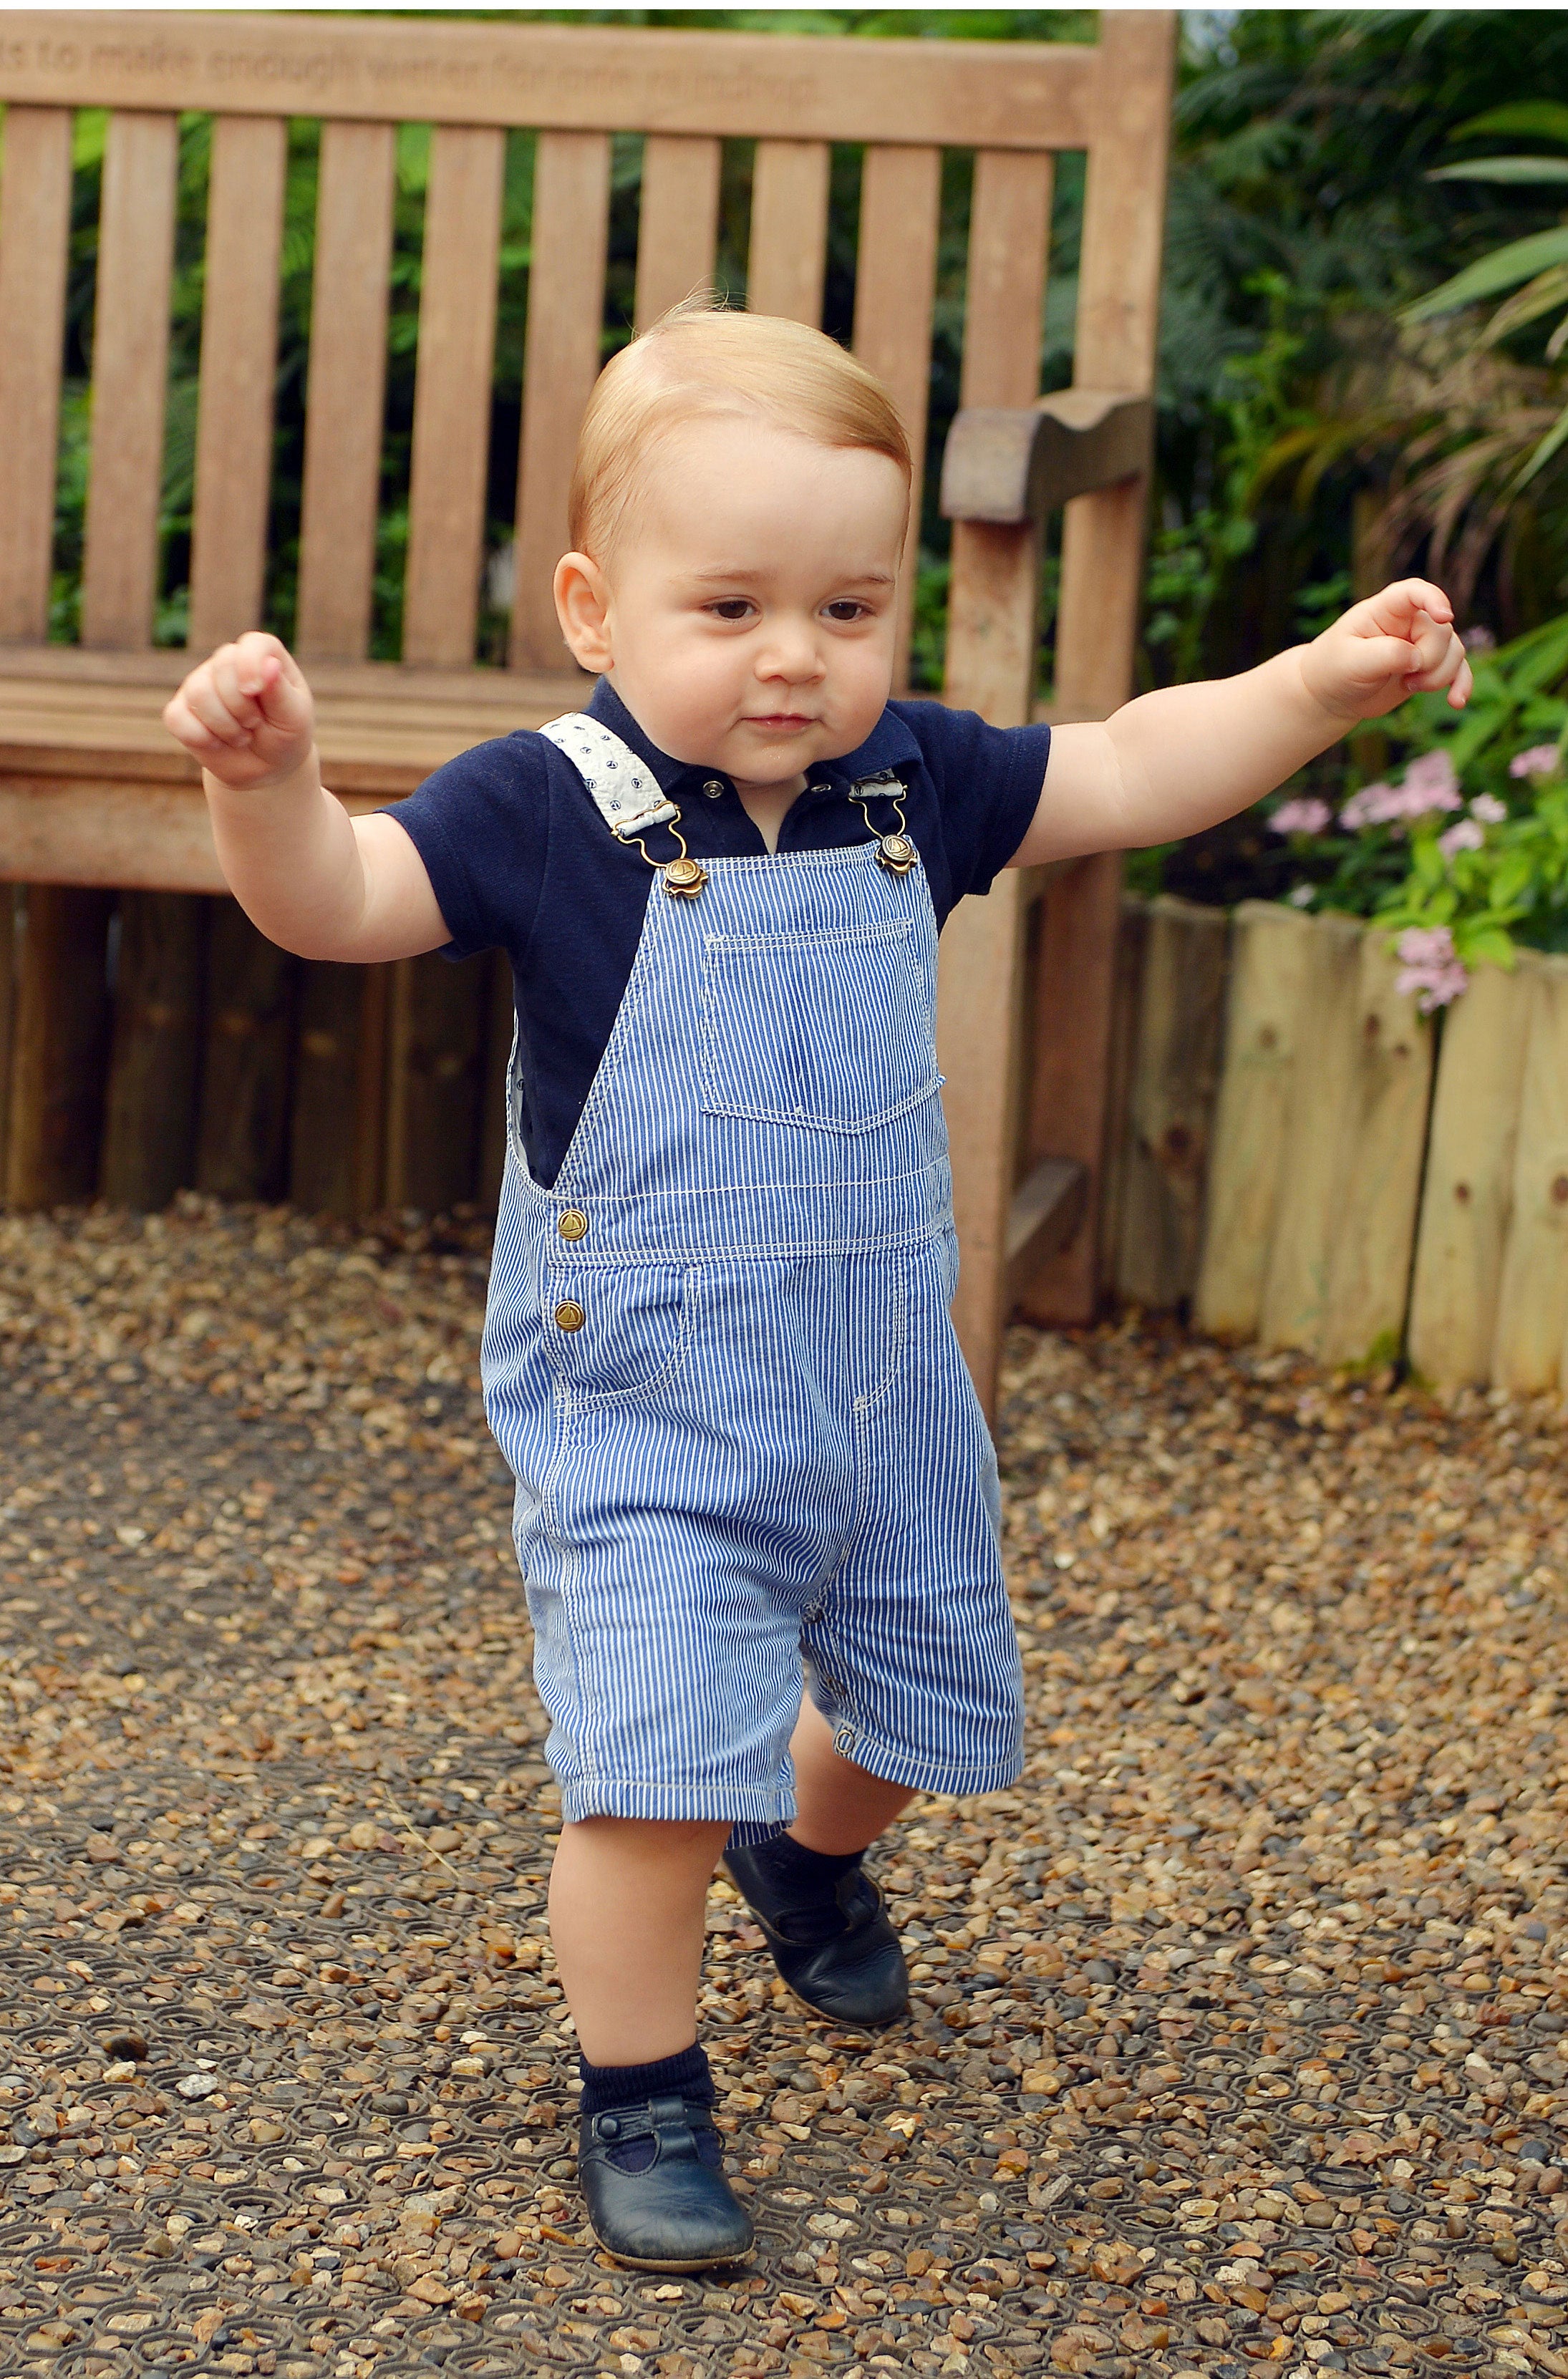 The picture to celebrate the birthday of Prince George who turns one on Tuesday